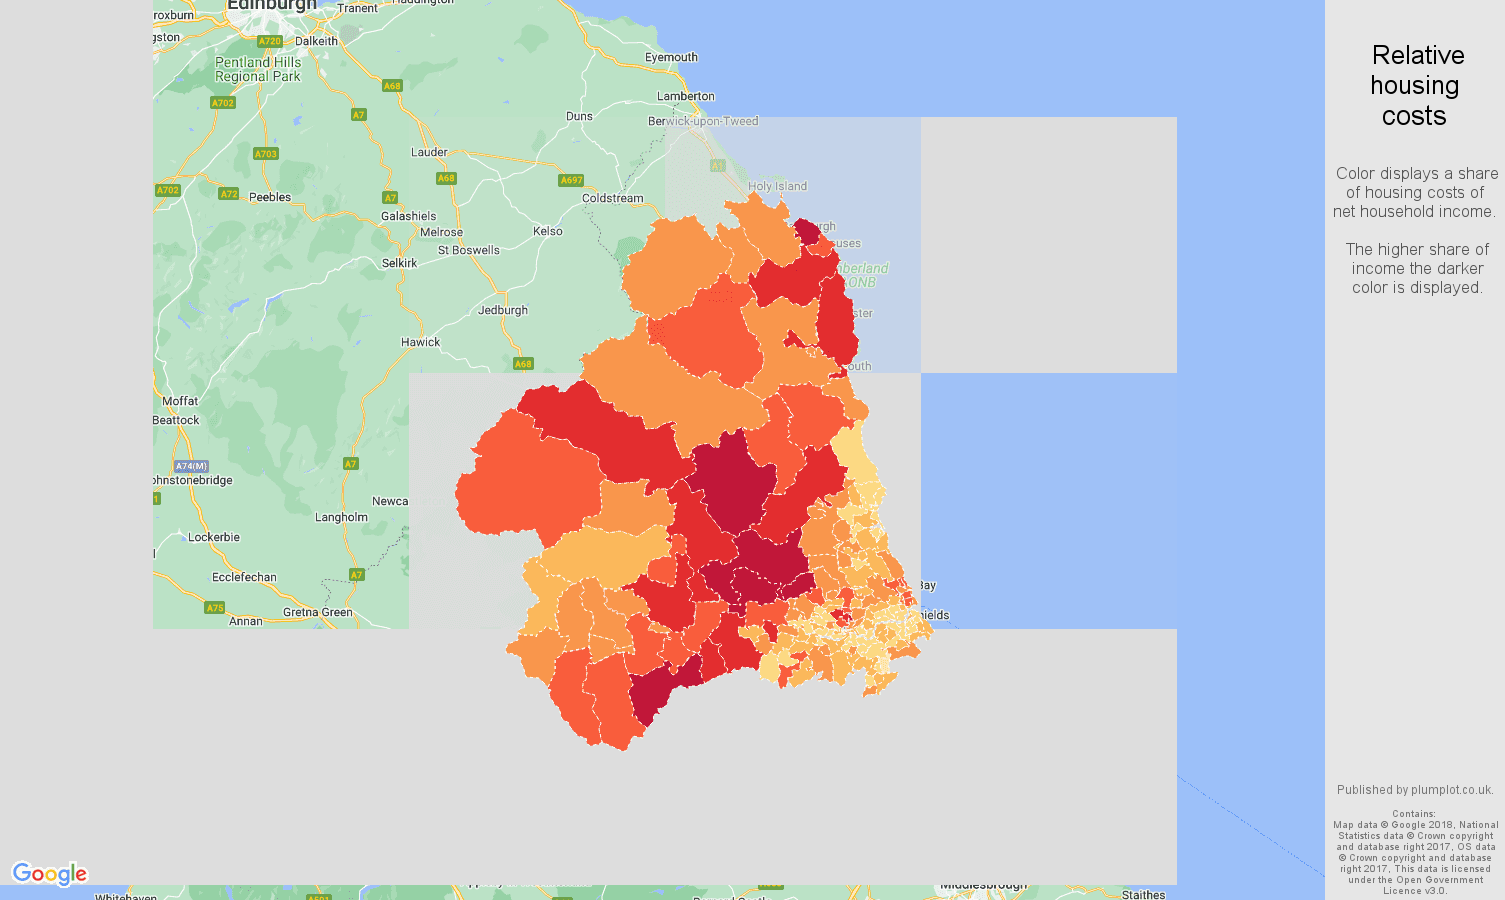 Newcastle upon Tyne relative housing costs map